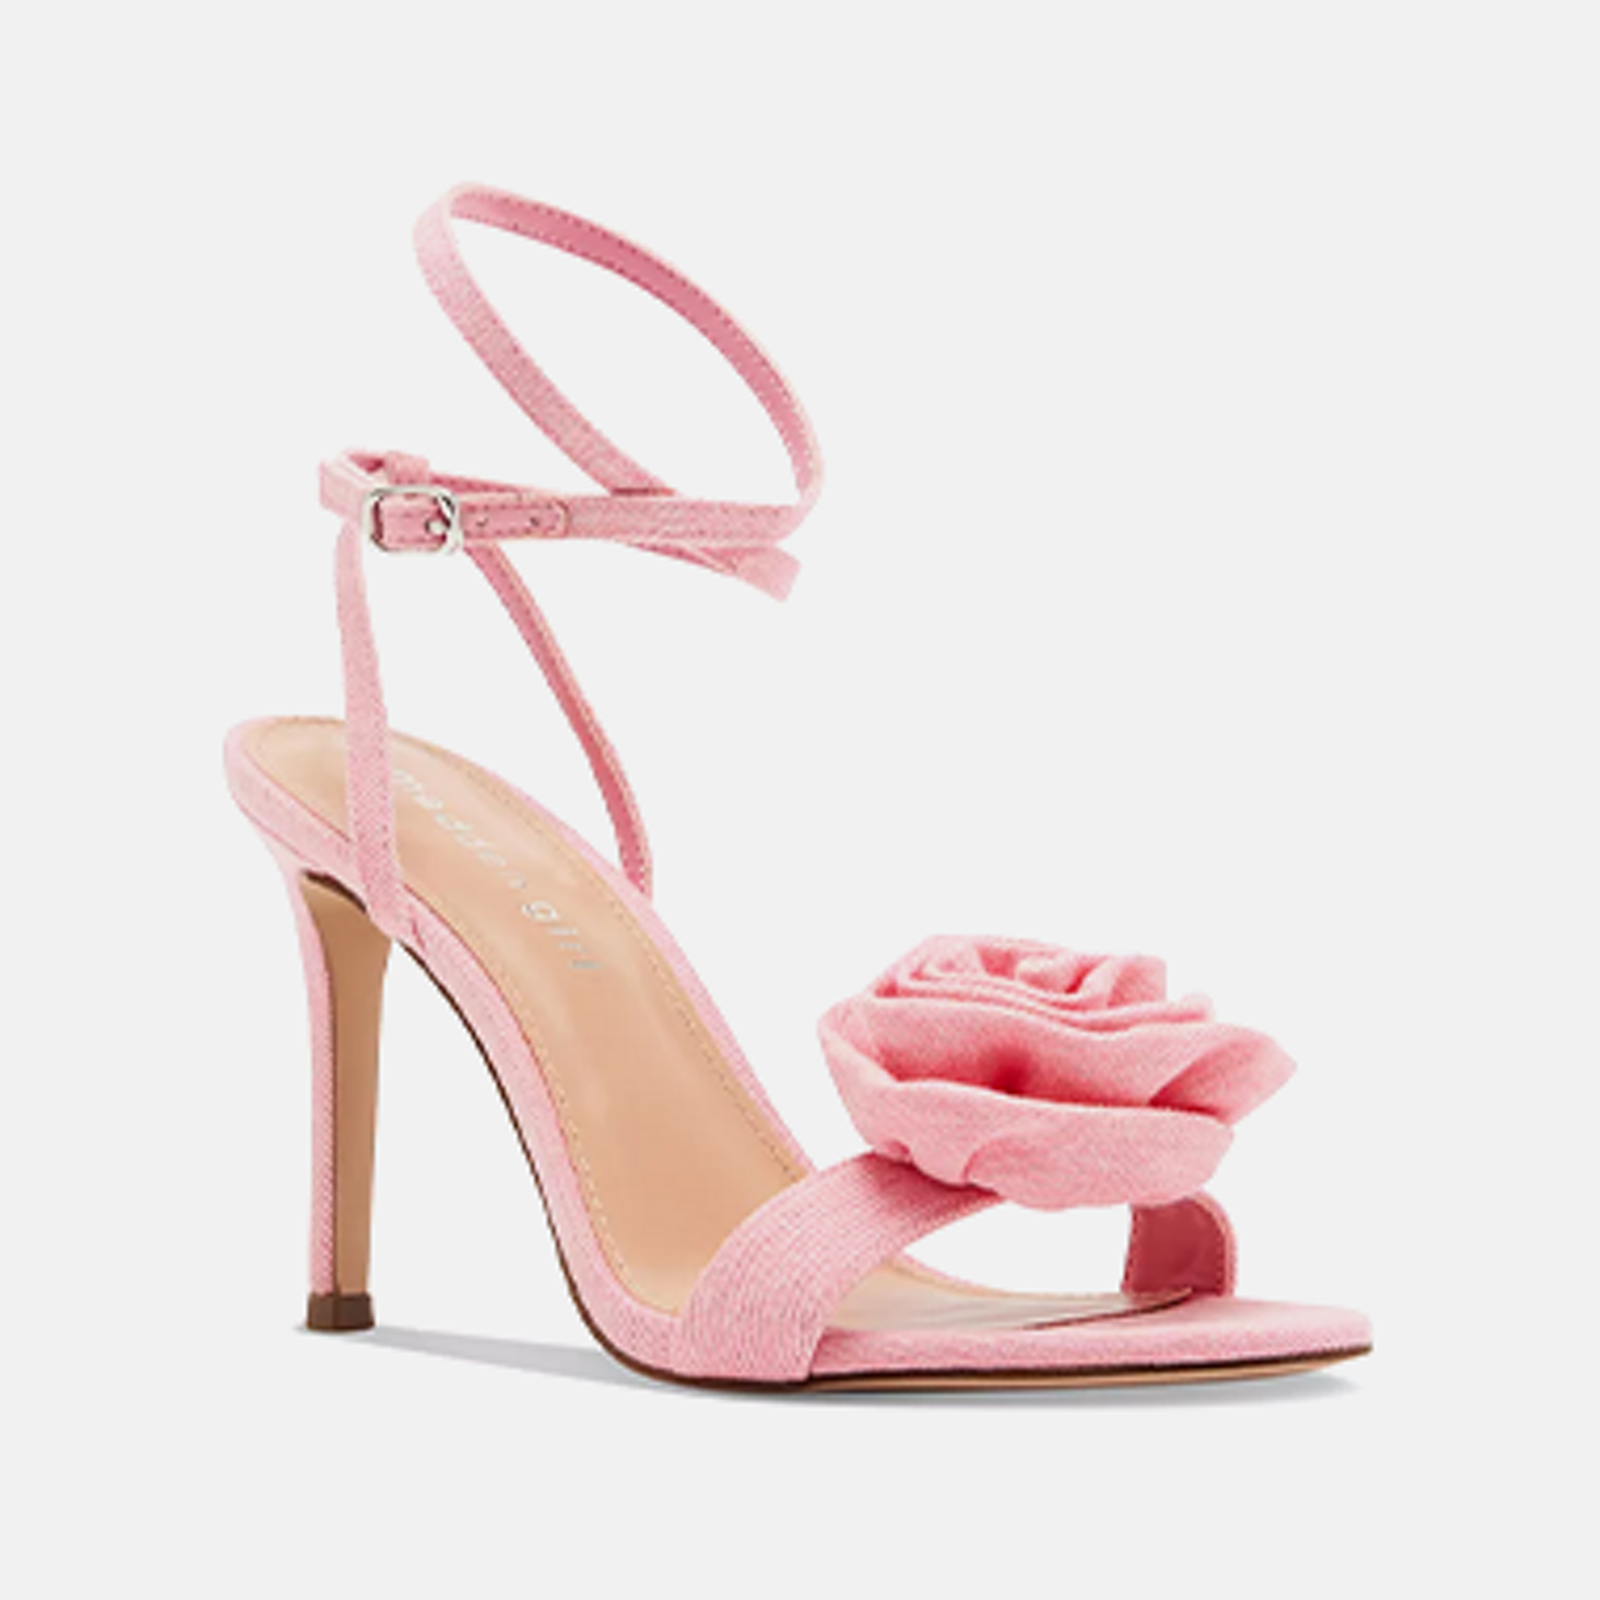 Women's Pink Shoes on Sale & Clearance - Macy's